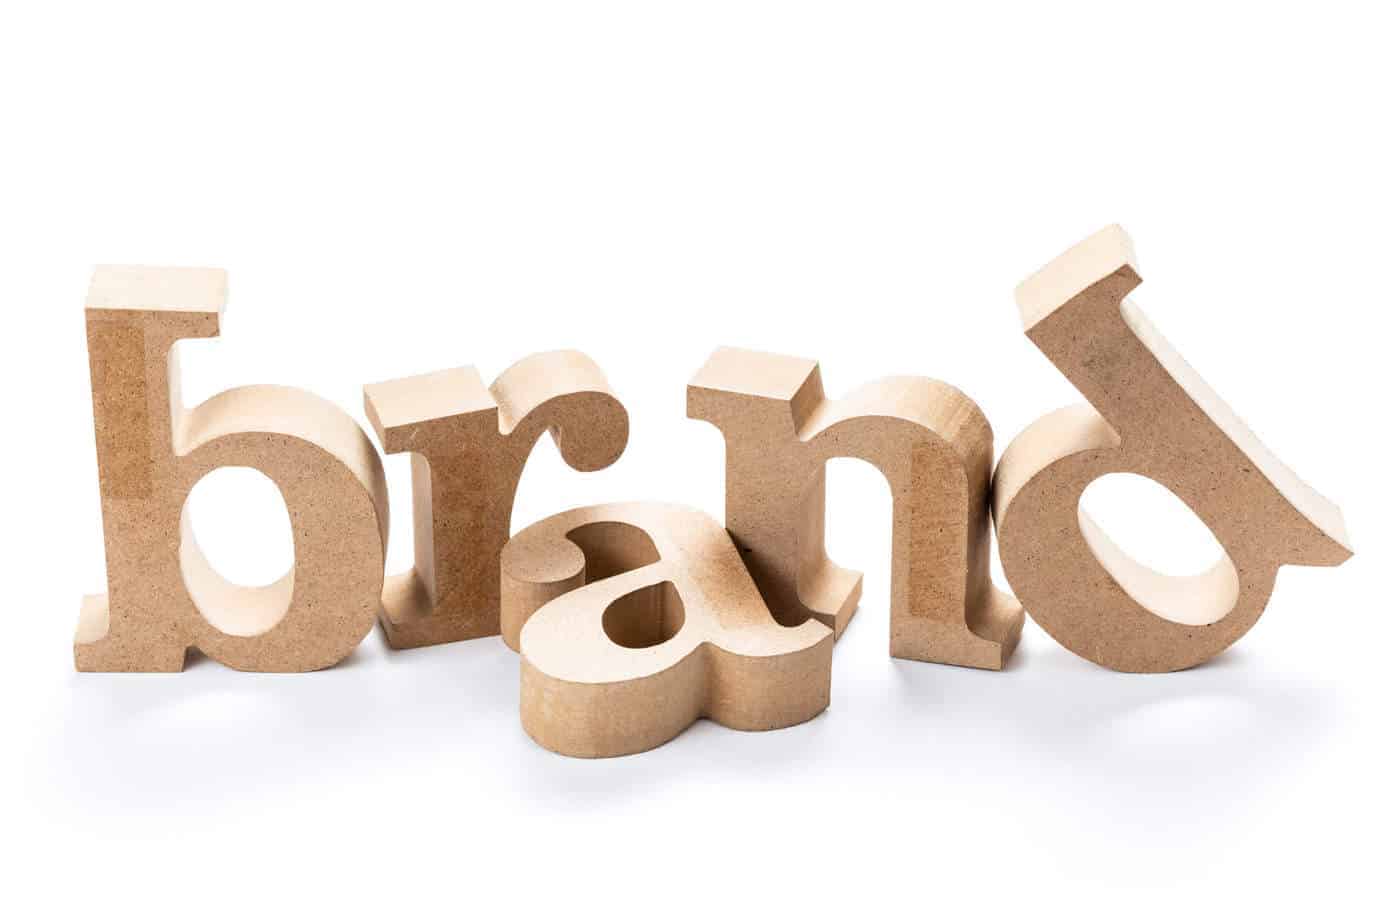 Brand spelled out in wooden letters